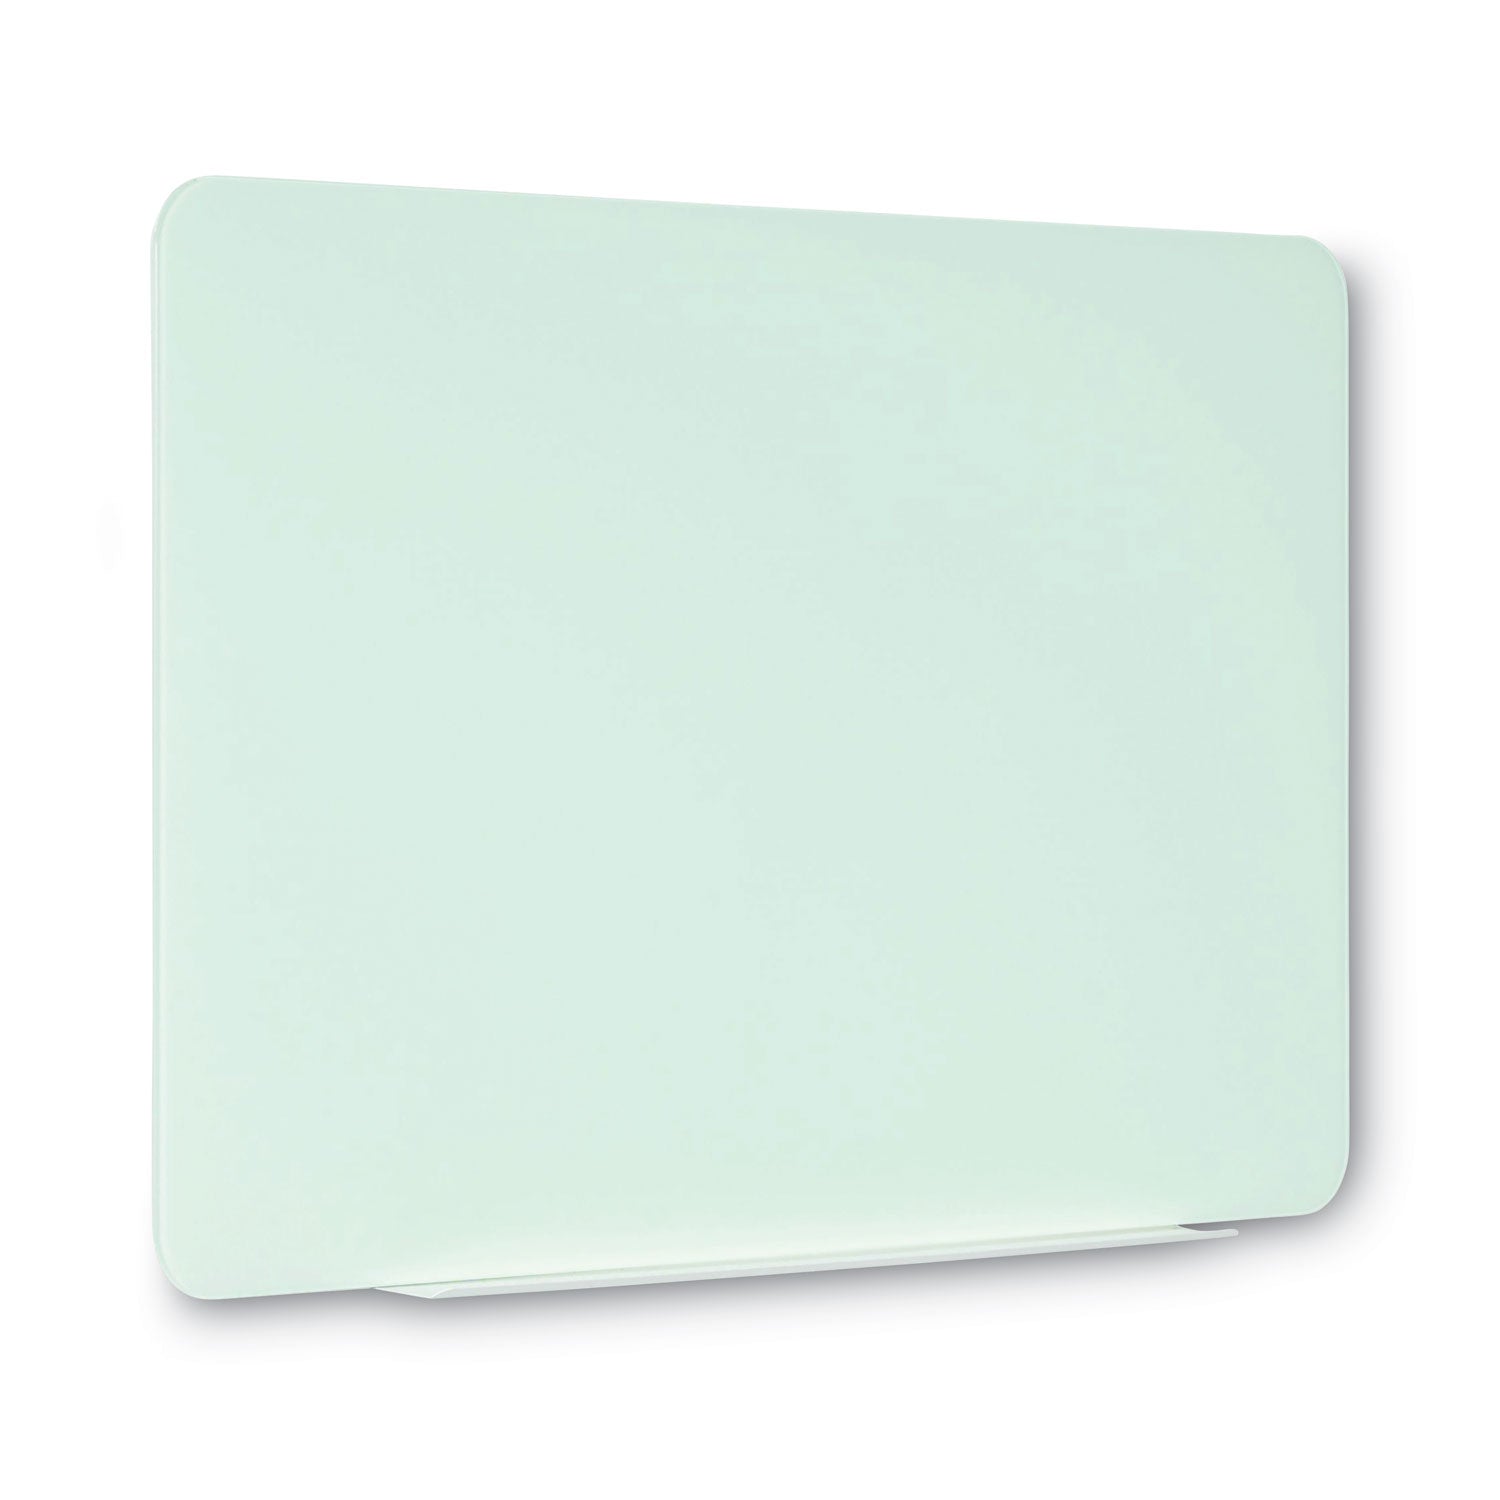 magnetic-glass-dry-erase-board-36-x-24-opaque-white-surface_bvcgl070101 - 5